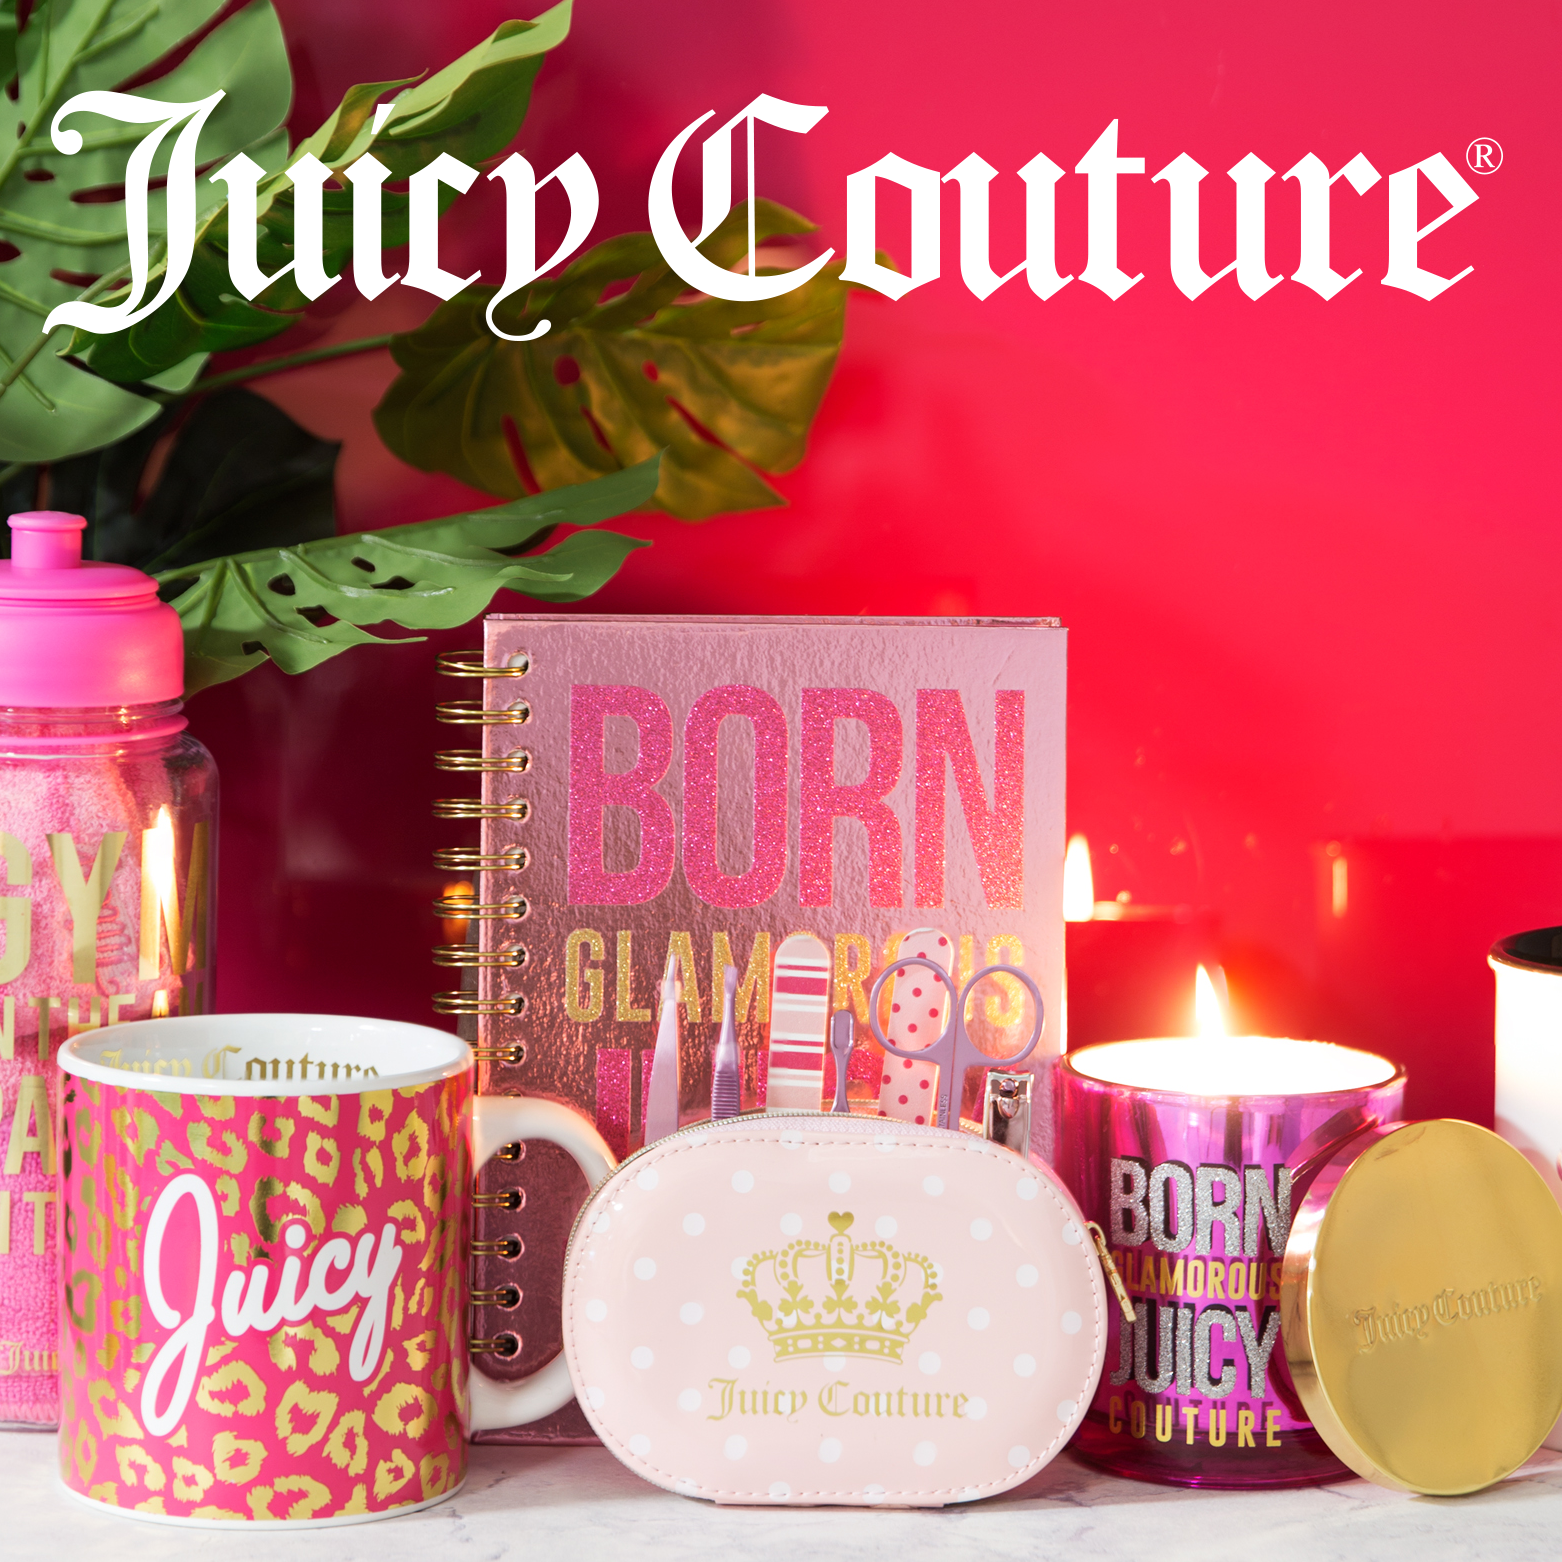 juicycouture.png